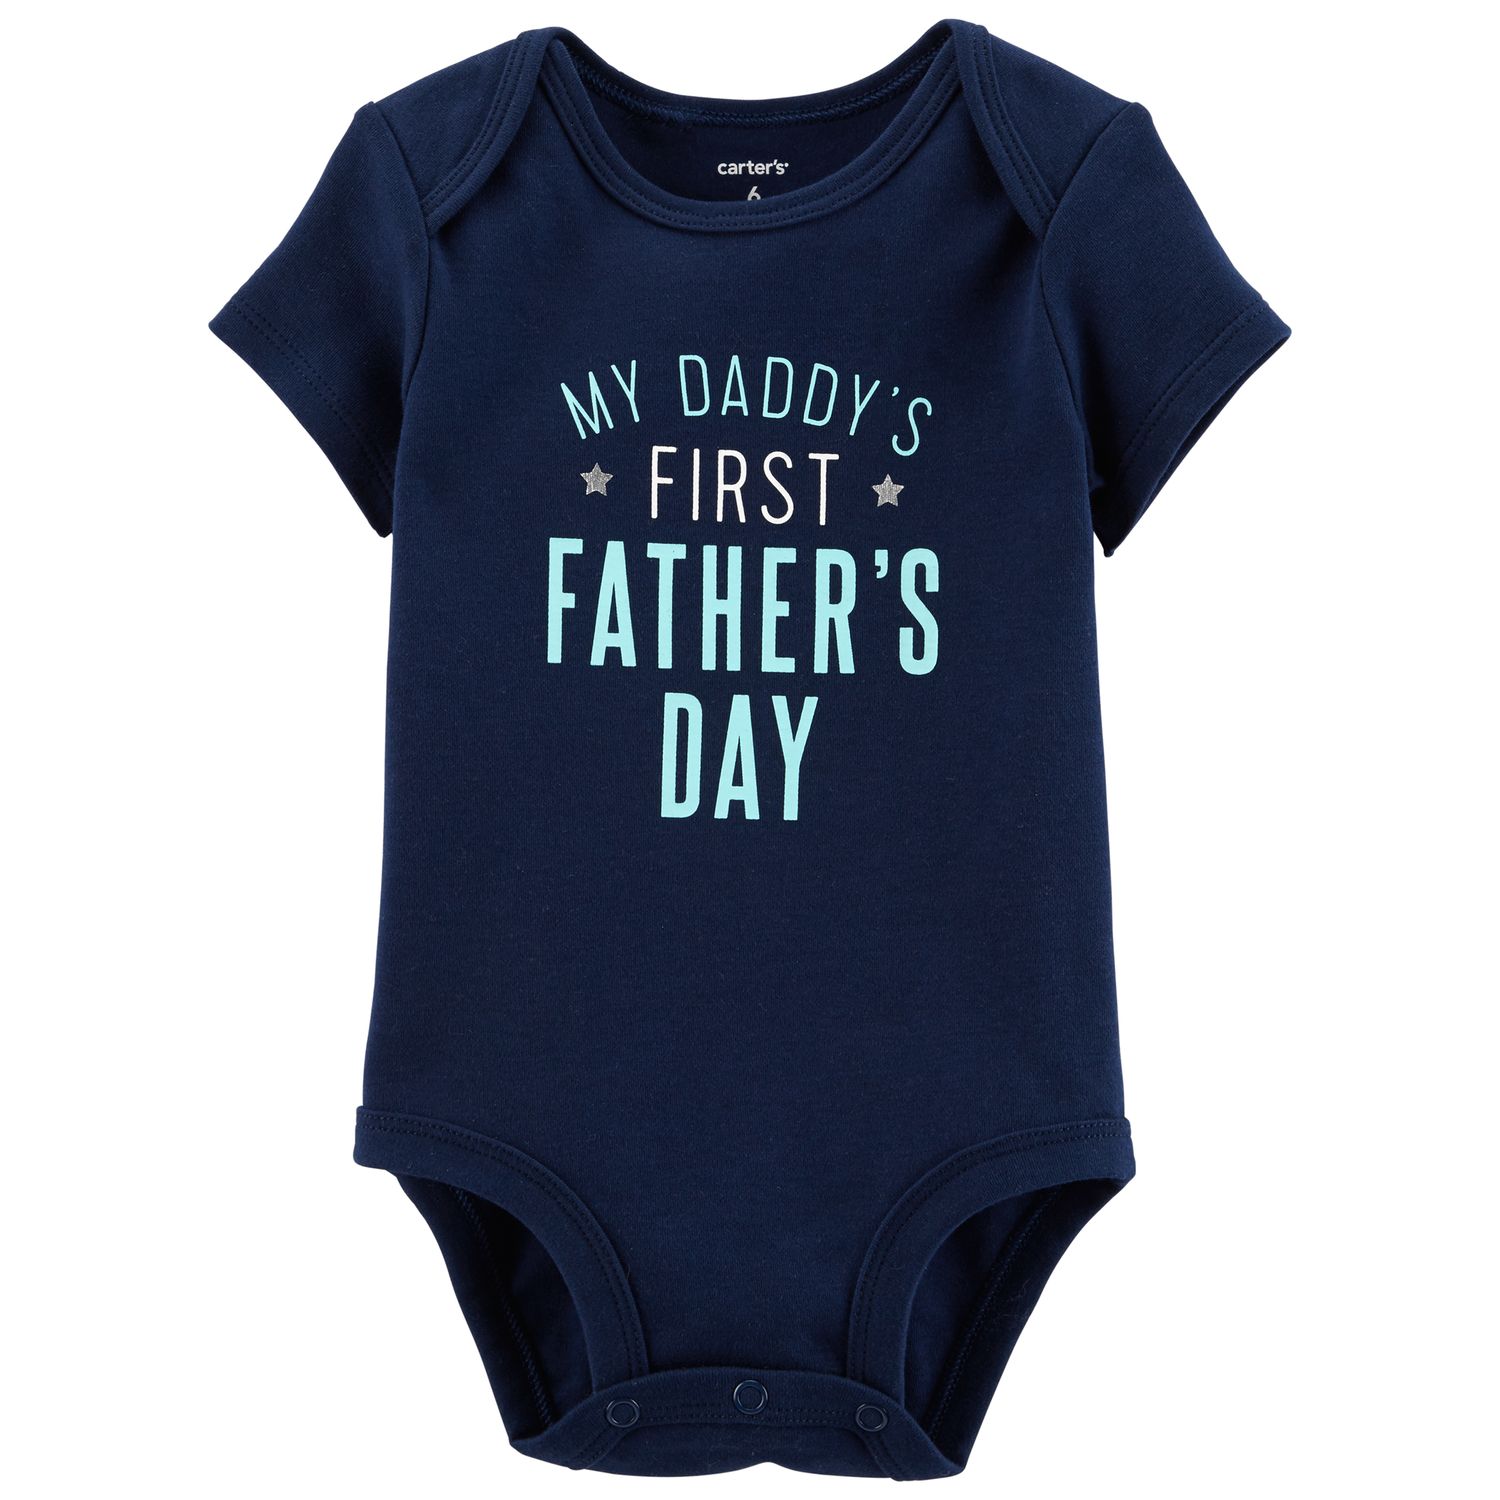 Download Daddys First Fathers Day Cheap Online Shopping